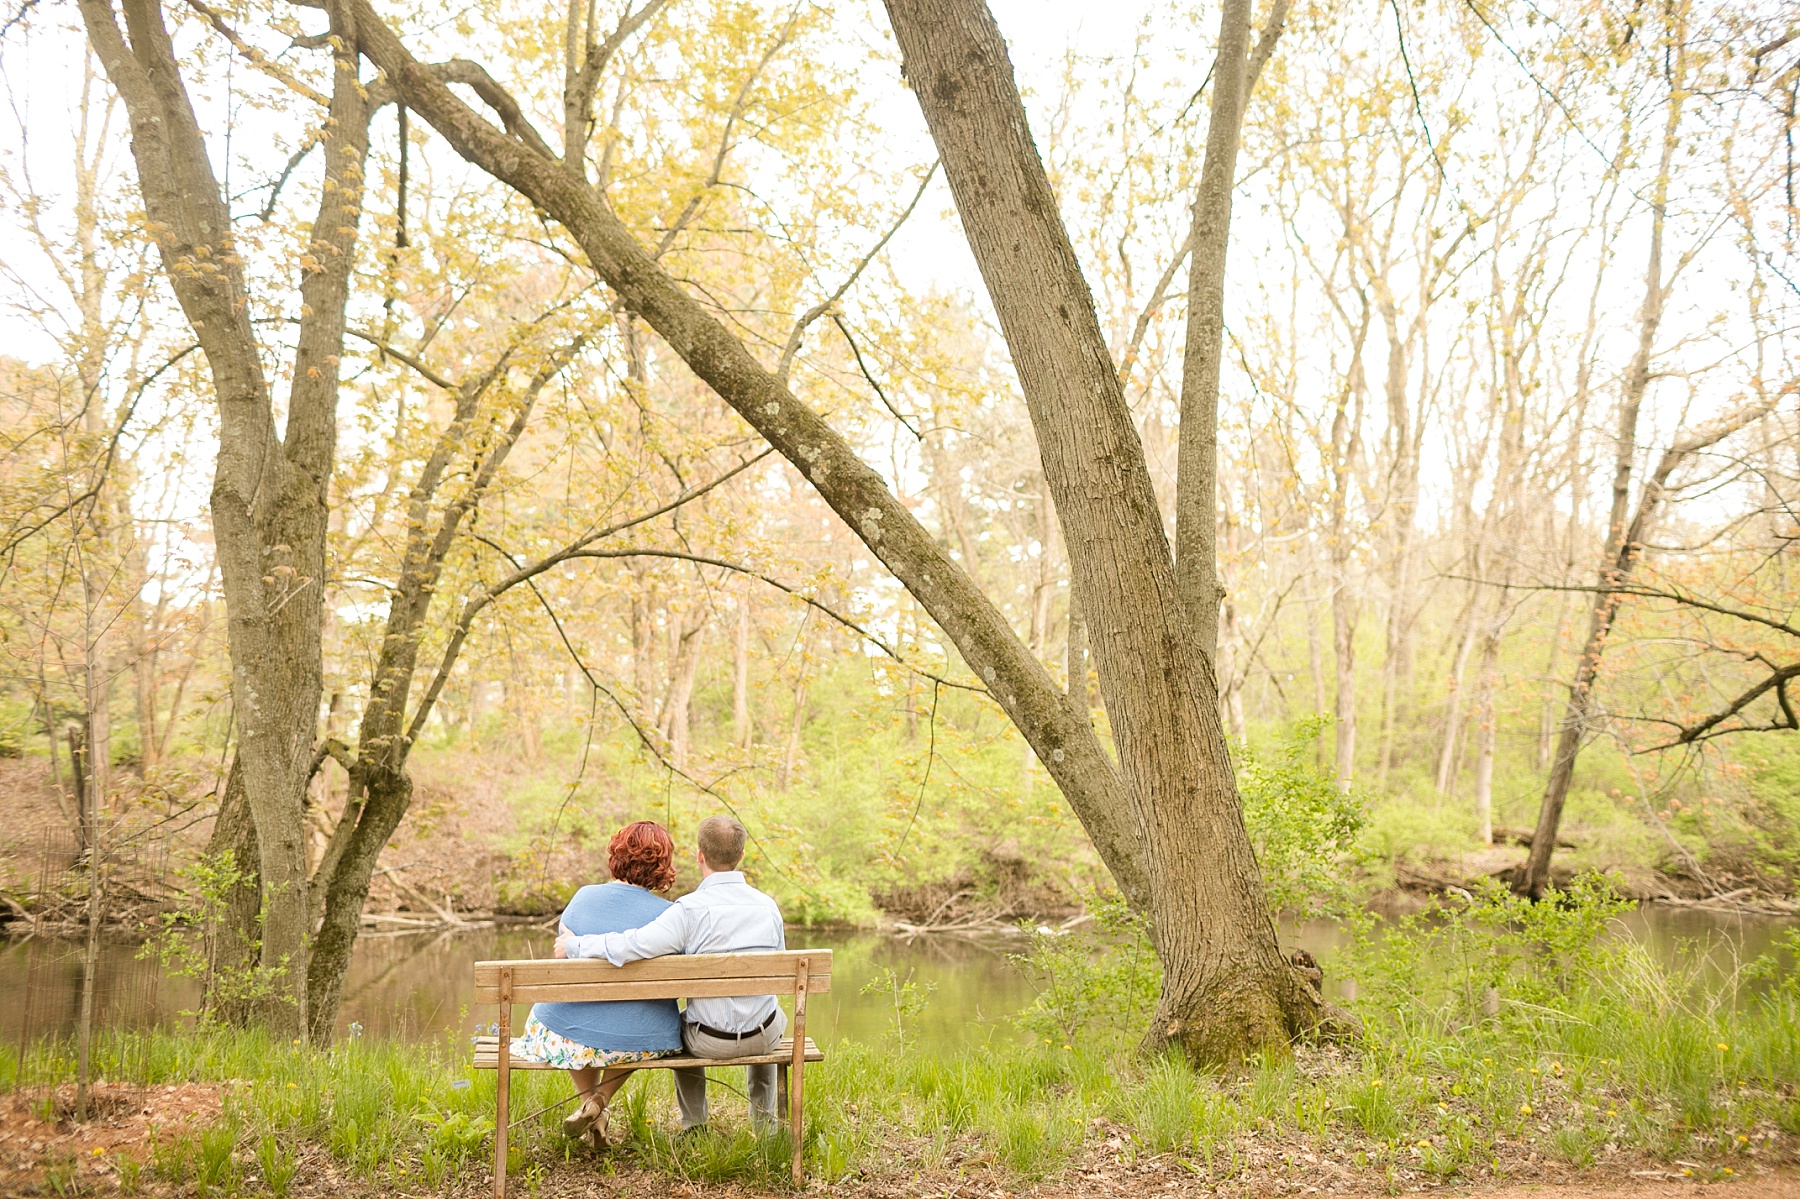 Helissa & Tim's engagement photos are filled with all things spring and my favorite park tucked in Chippewa Falls.